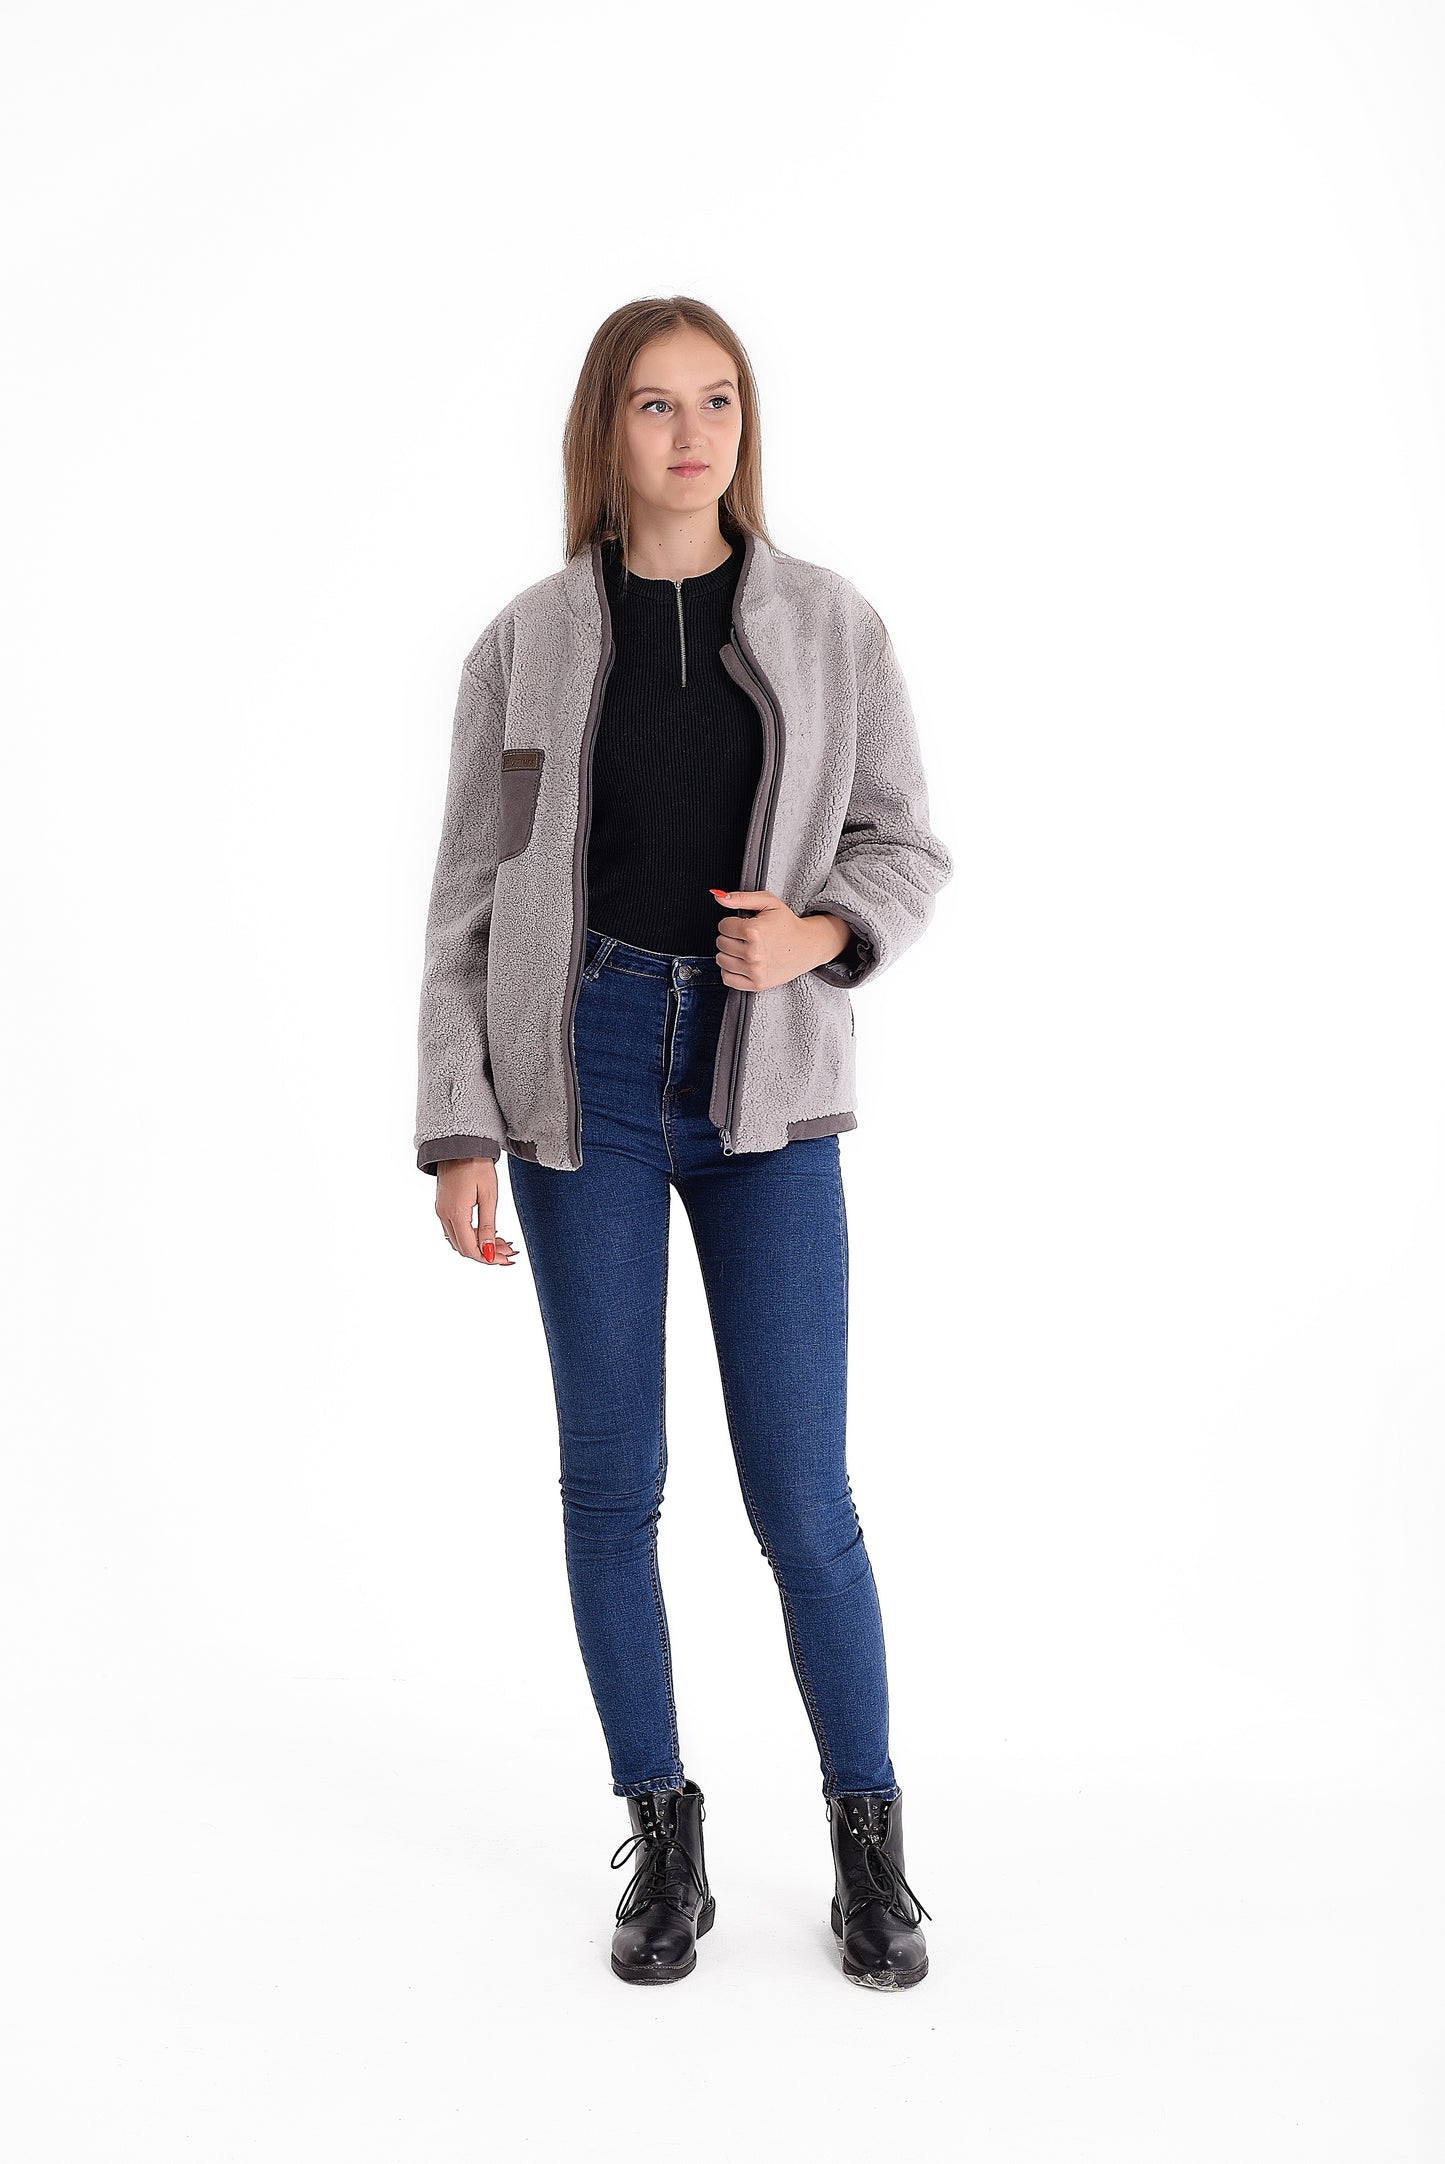 Lightweight Short Sheepskin Jacket in Grey Color with Boucle Sheepskin and Suede Leather Inserts